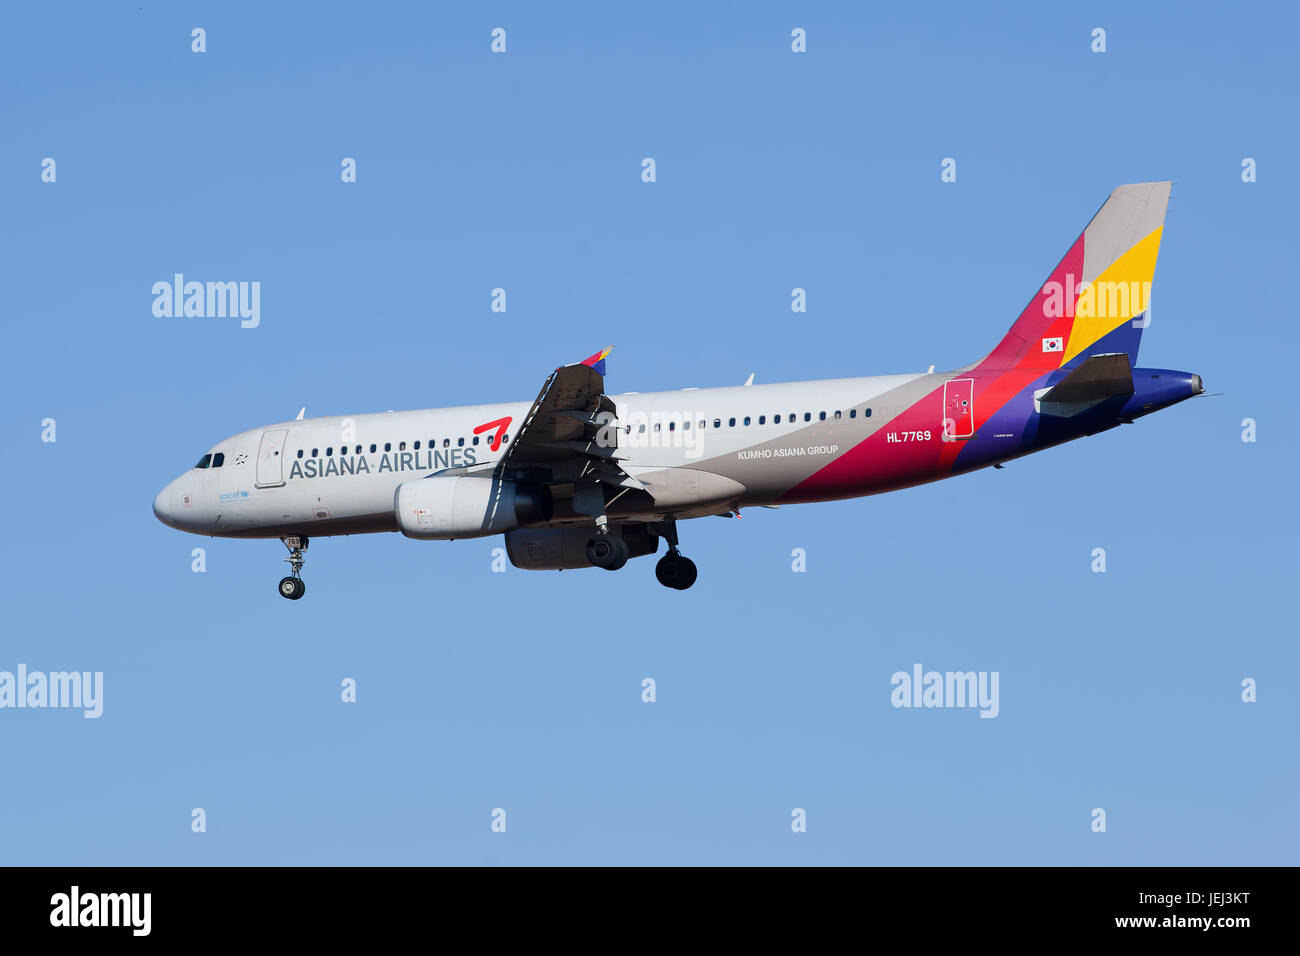 BEIJING-FEBRUARY 18, 2015. Asiana Airlines HL7769, Airbus A320-200 is landing. The Airbus A320 is a two-engine short- to medium-range narrow body airl Stock Photo